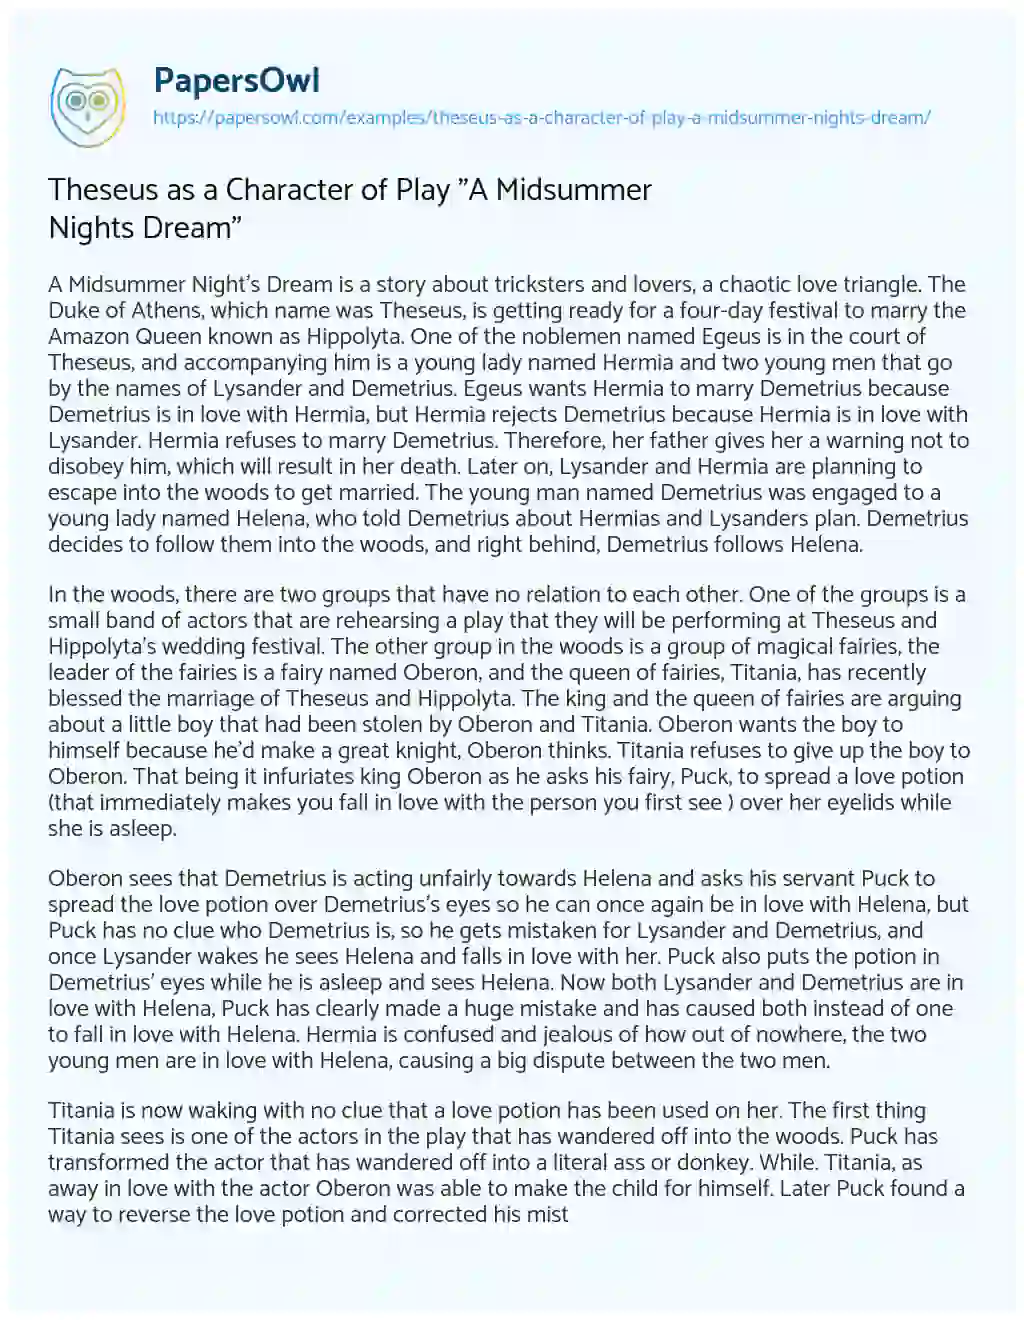 Essay on Theseus as a Character of Play “A Midsummer Nights Dream”